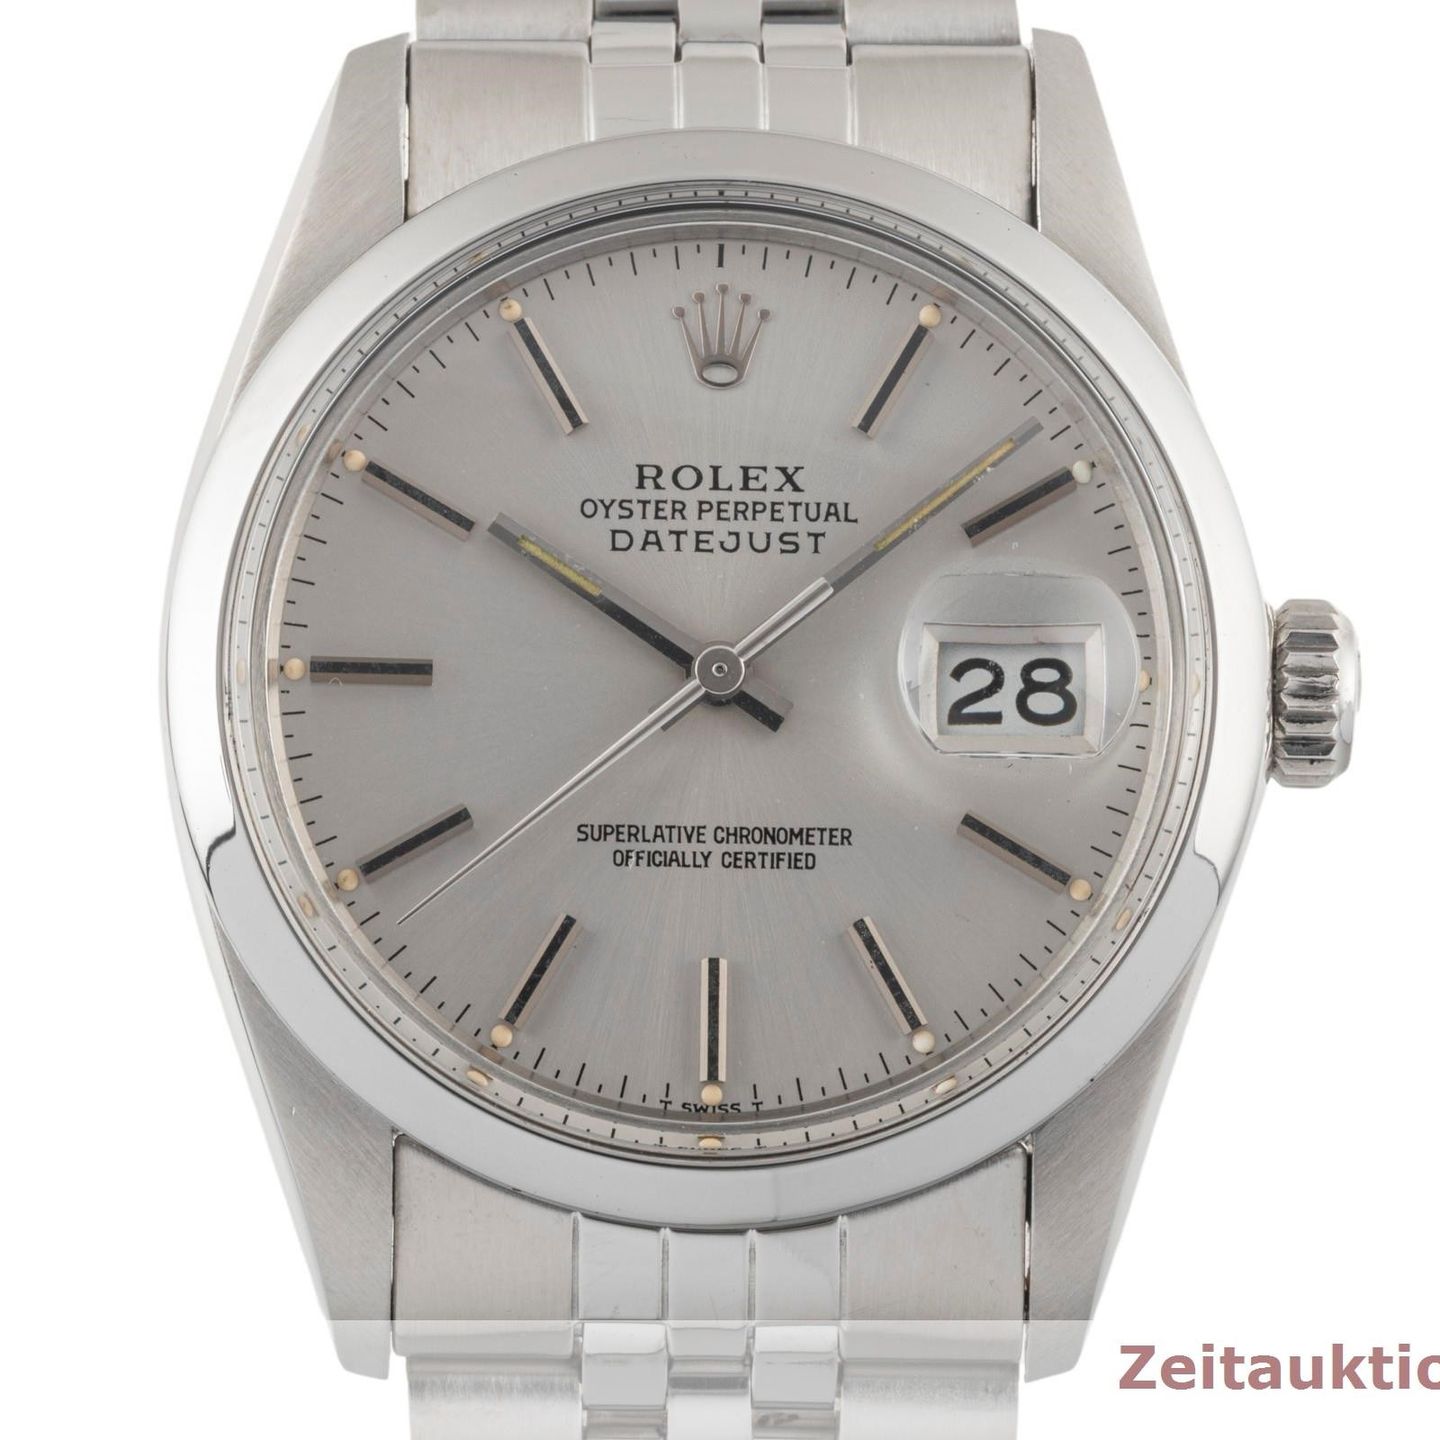 Rolex Oyster Perpetual 36 116000 (1982) - Silver dial 36 mm Steel case (6/8)